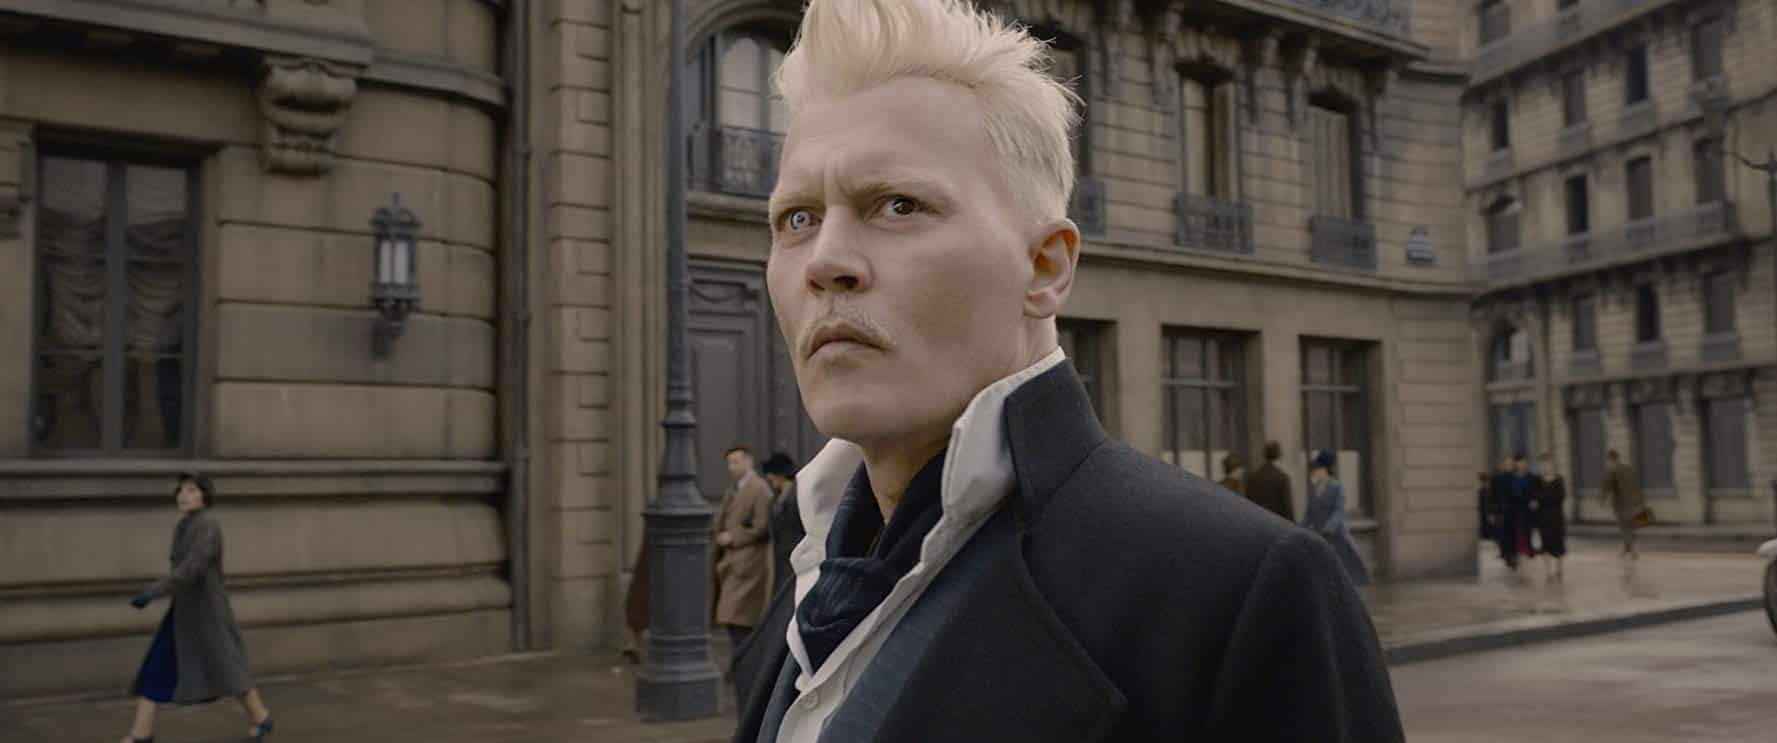 Johnny Depp Has Resigned from the Fantastic Beasts Series